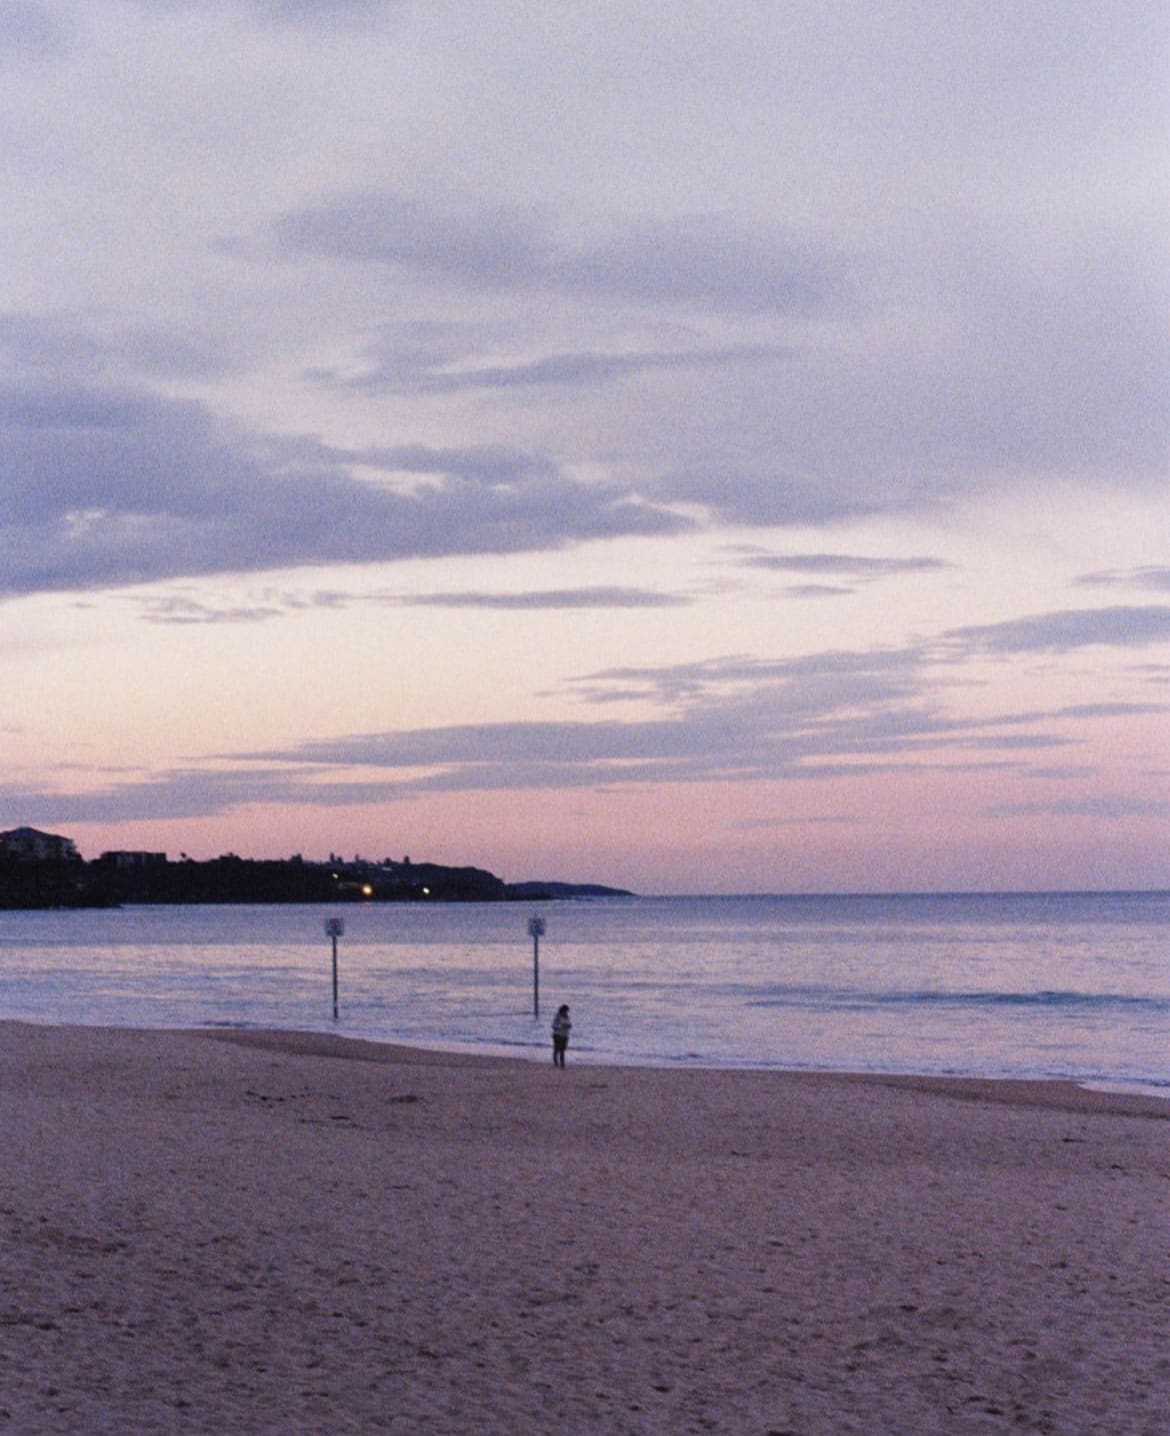 Sunset at Manly Beach